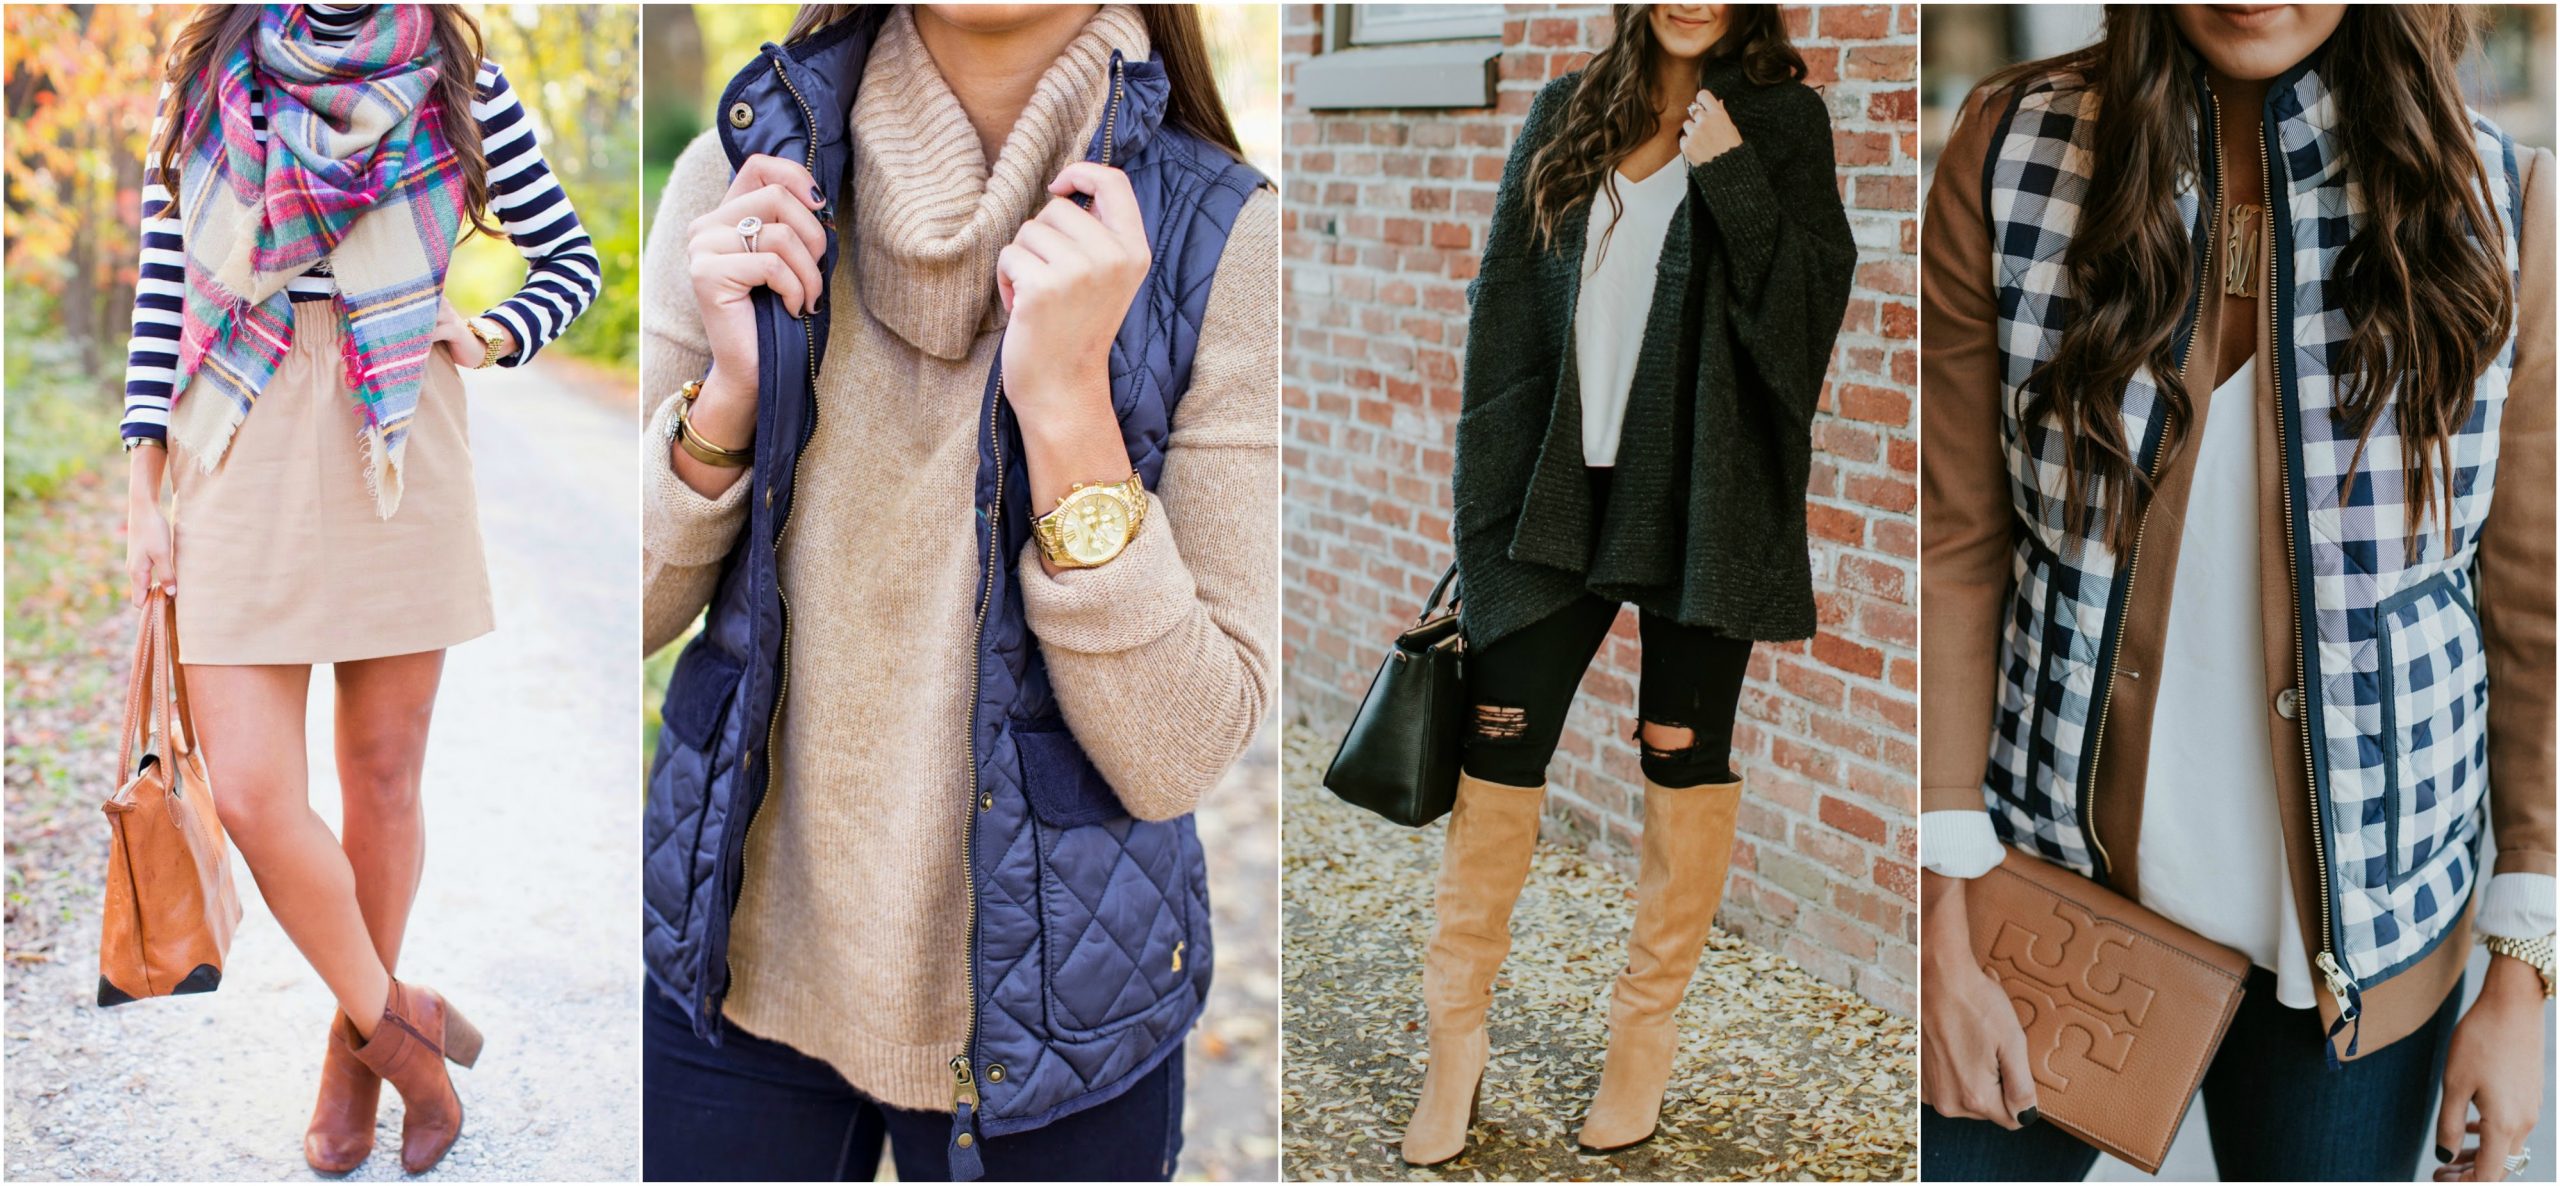 favorite fall outfits, fall style, fall fashion, fall outfits, fall inspiration, favorite fall style, fall recap, fall vests, quilted vests, j.crew fall outfit, fall jackets, fall coats, fall boots, fall booties, bean boots, duckboots, fall duckboots, fall stripes, fall plaid outfits, fall inspiration // grace wainwright a southern drawl